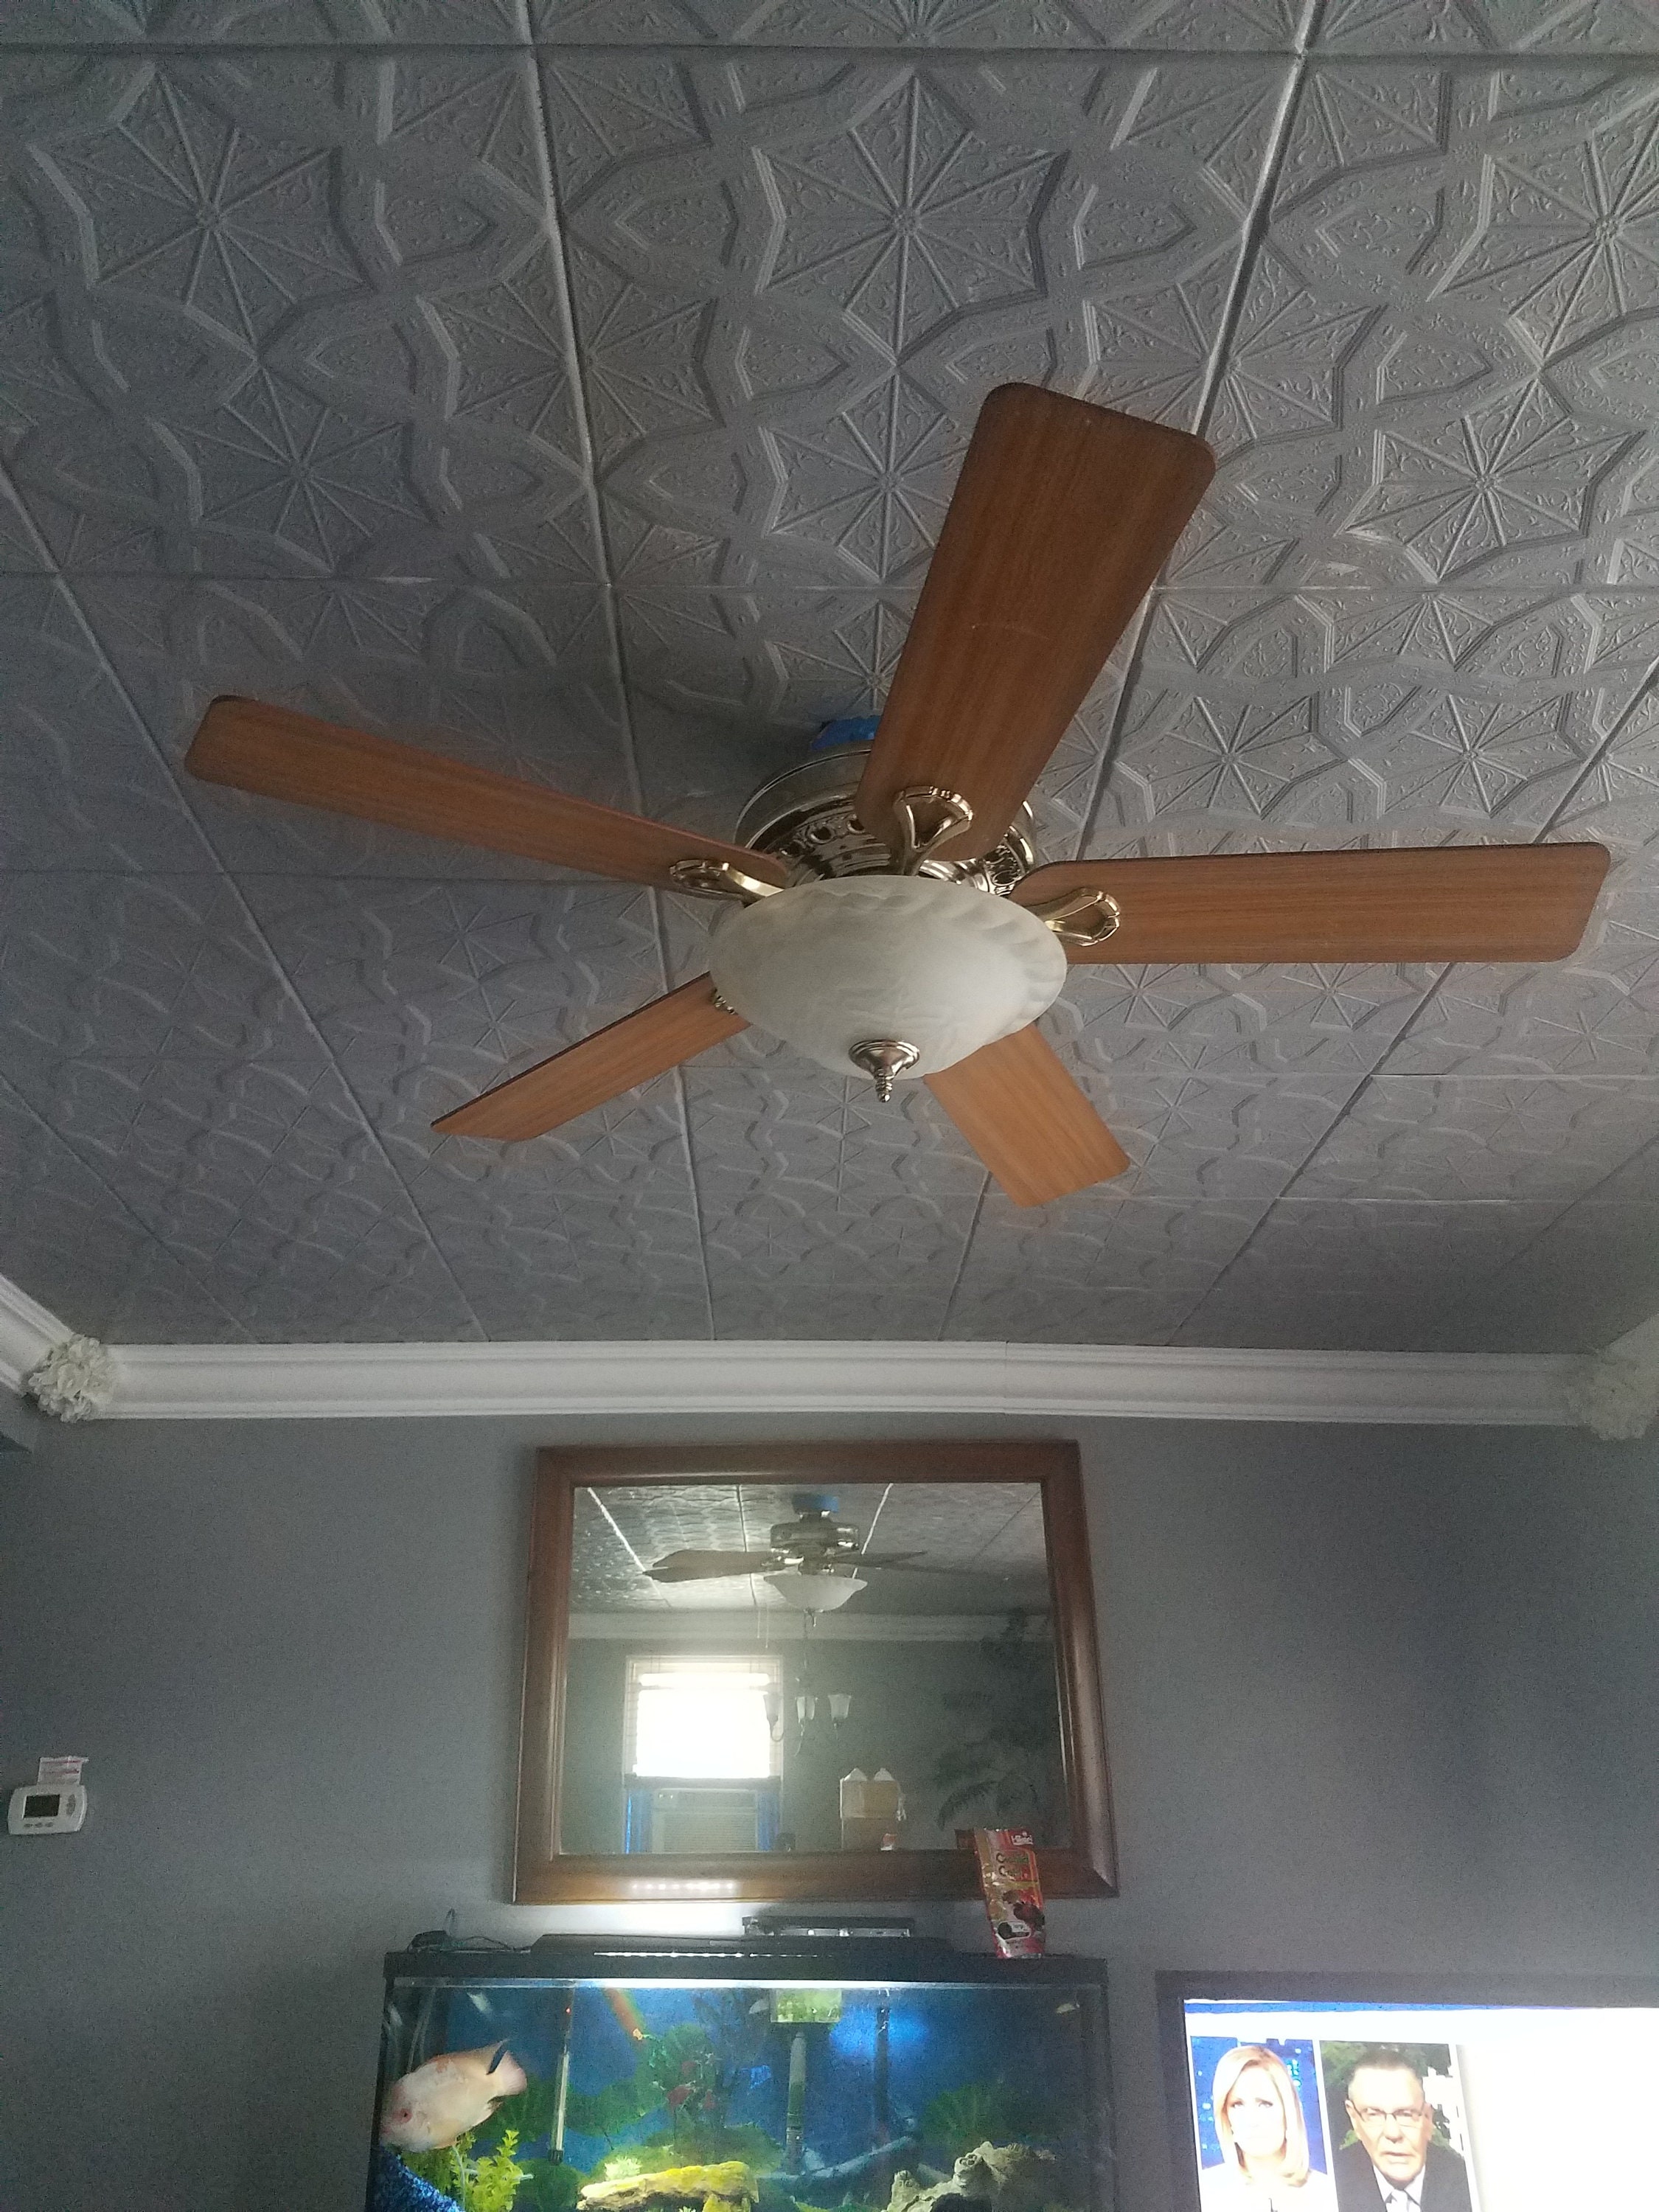 Styrofoam Ceiling Tiles To Cover, How To Cover A Popcorn Ceiling With Tiles